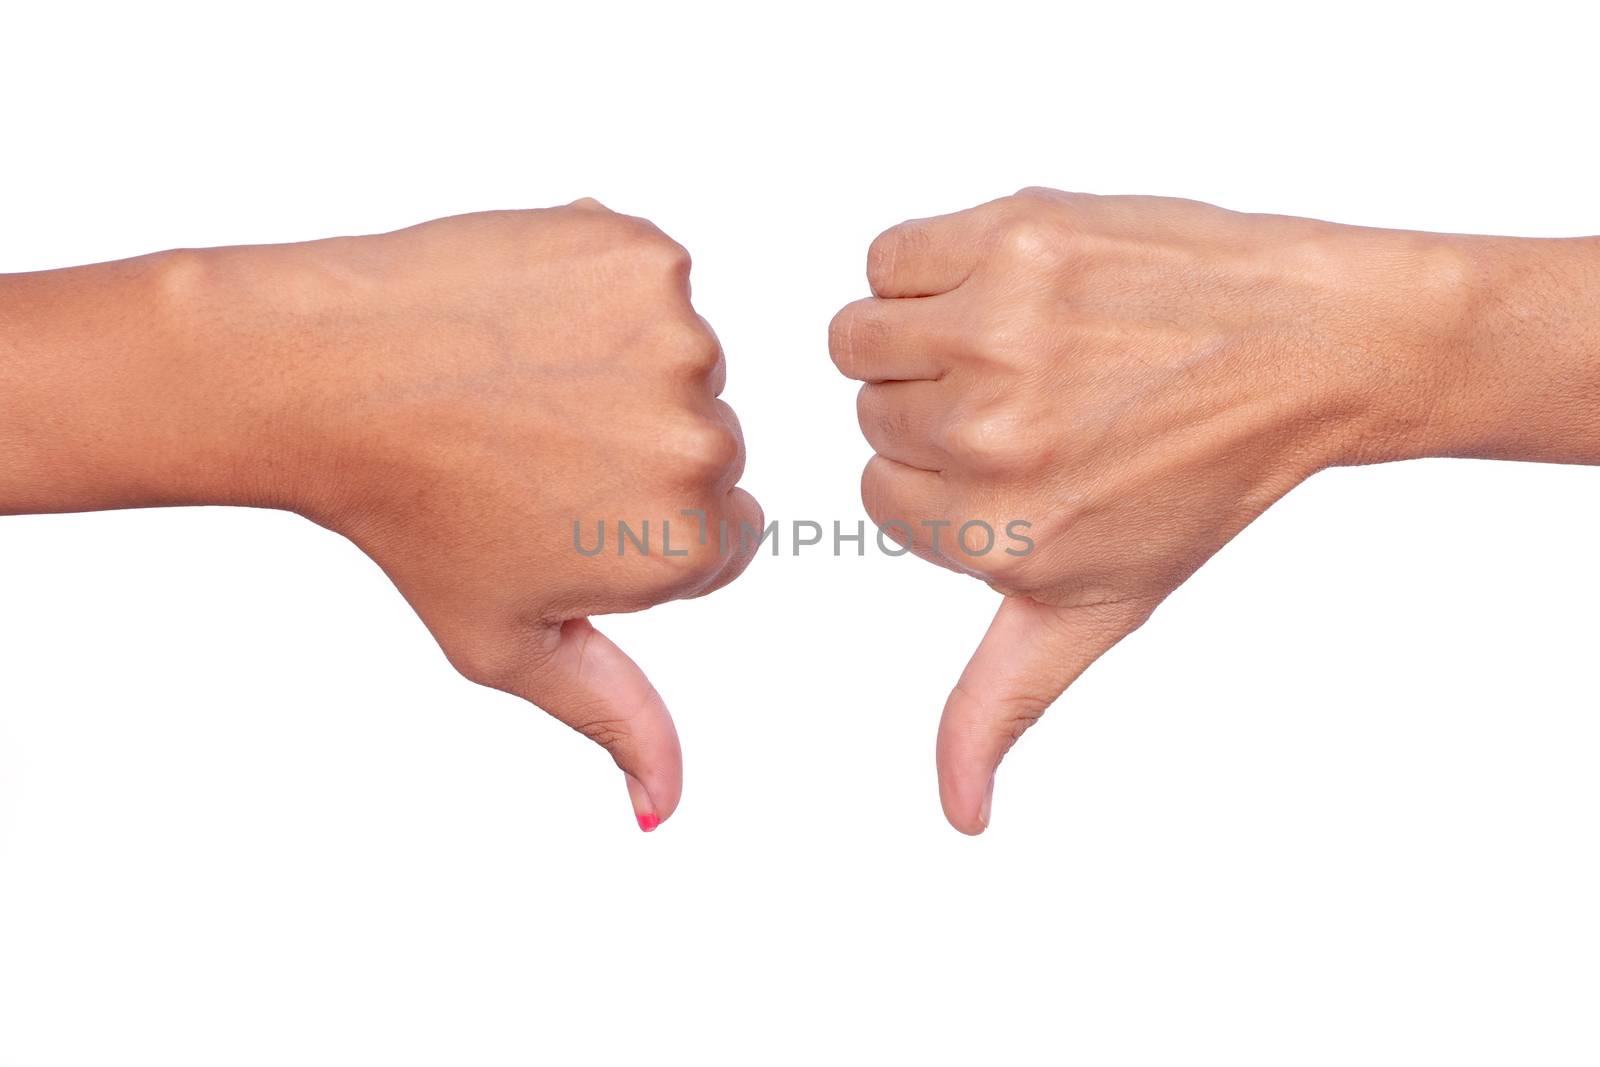 Female hands making signals with the thumb down